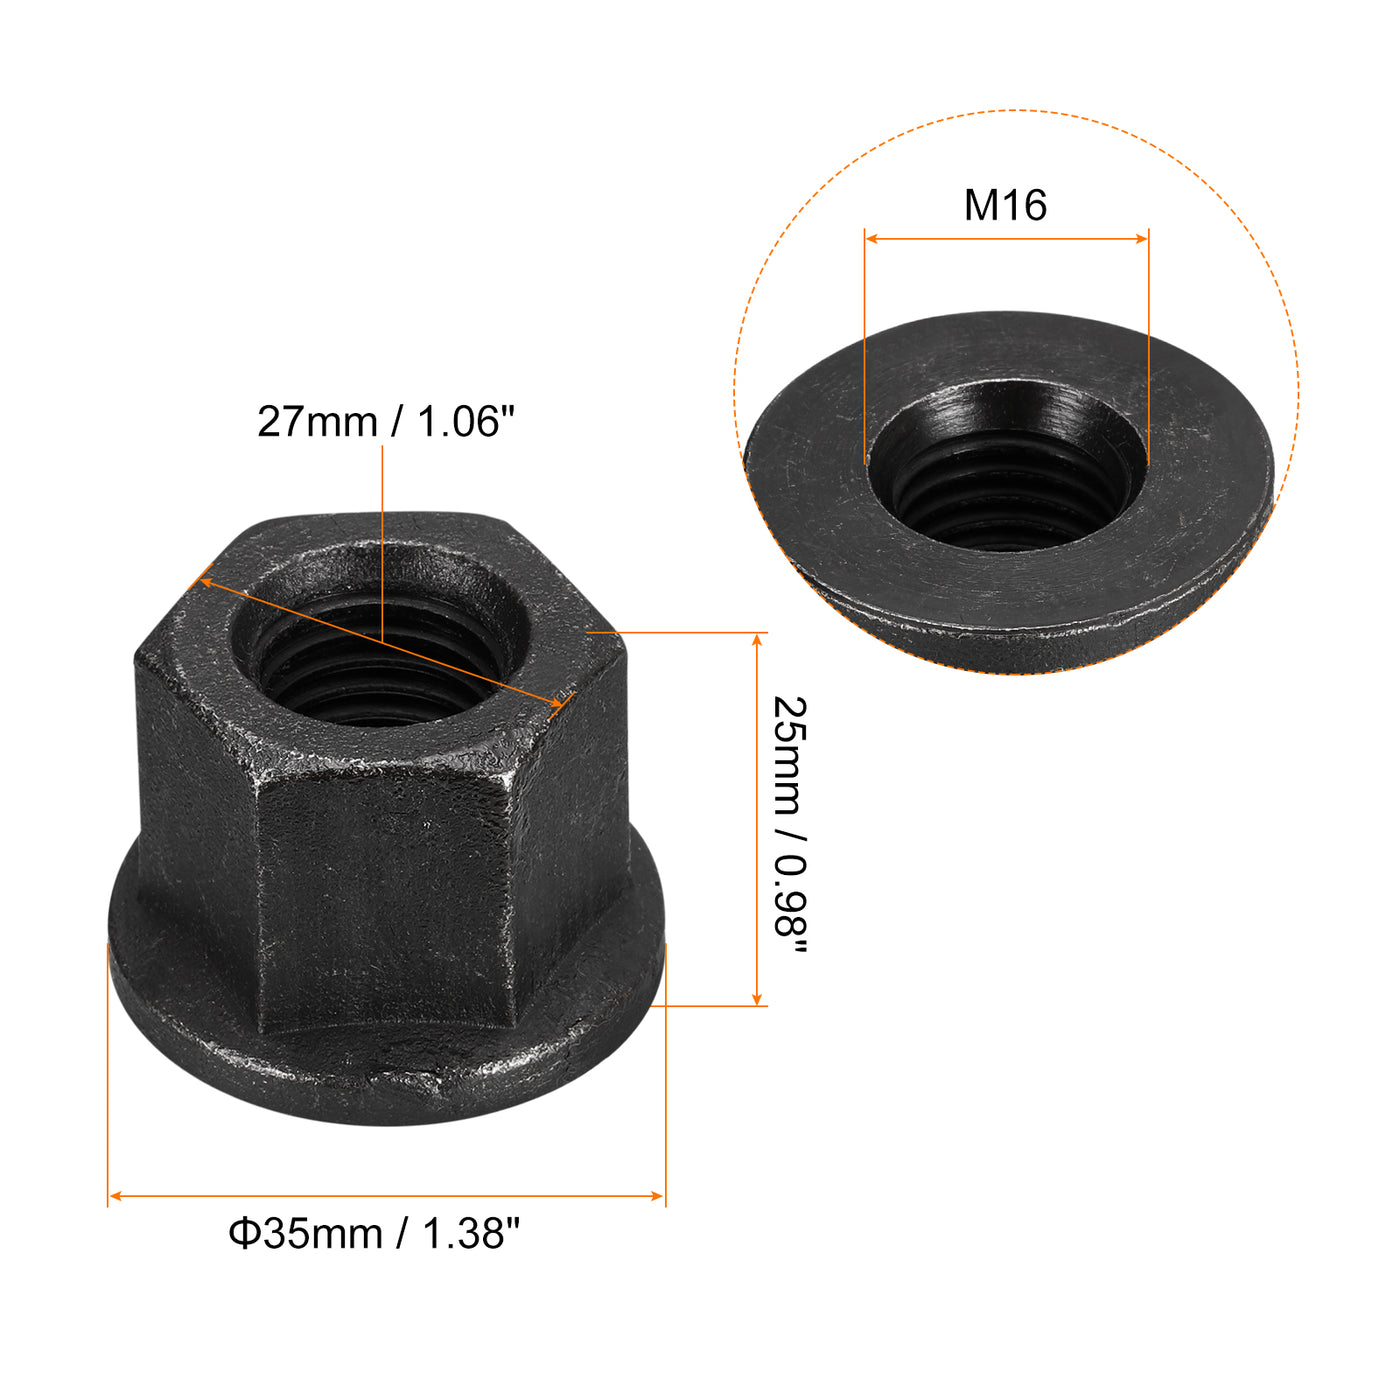 uxcell Uxcell M16 Flange Hex Lock Nuts, 2pcs Grade 8.8 Carbon Steel Hex Flange Nuts